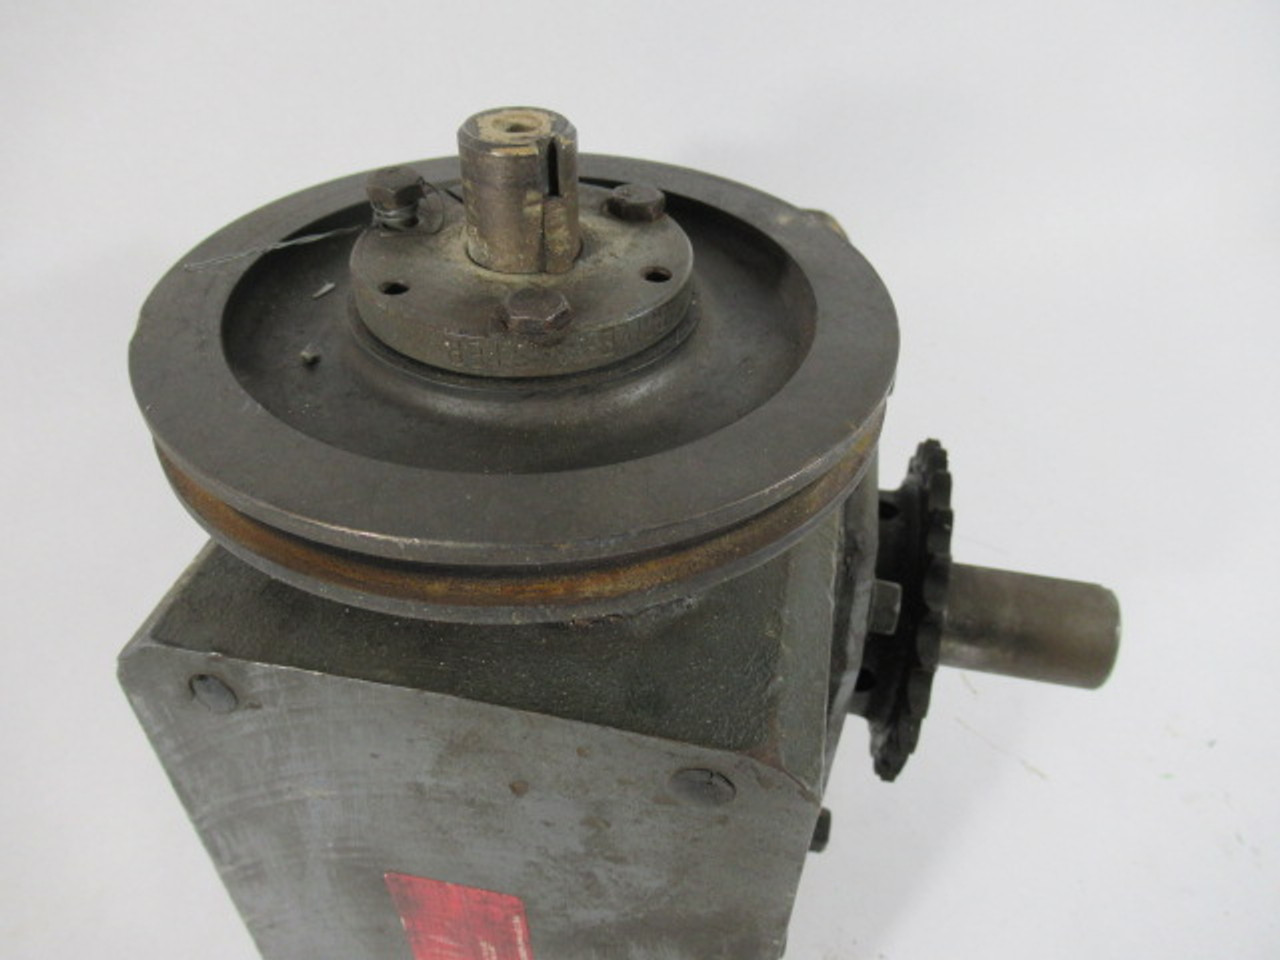 Sterling Electric Inc 5BR00S040 Gear Reducer Input RPM 1800 Ratio 40:1 USED